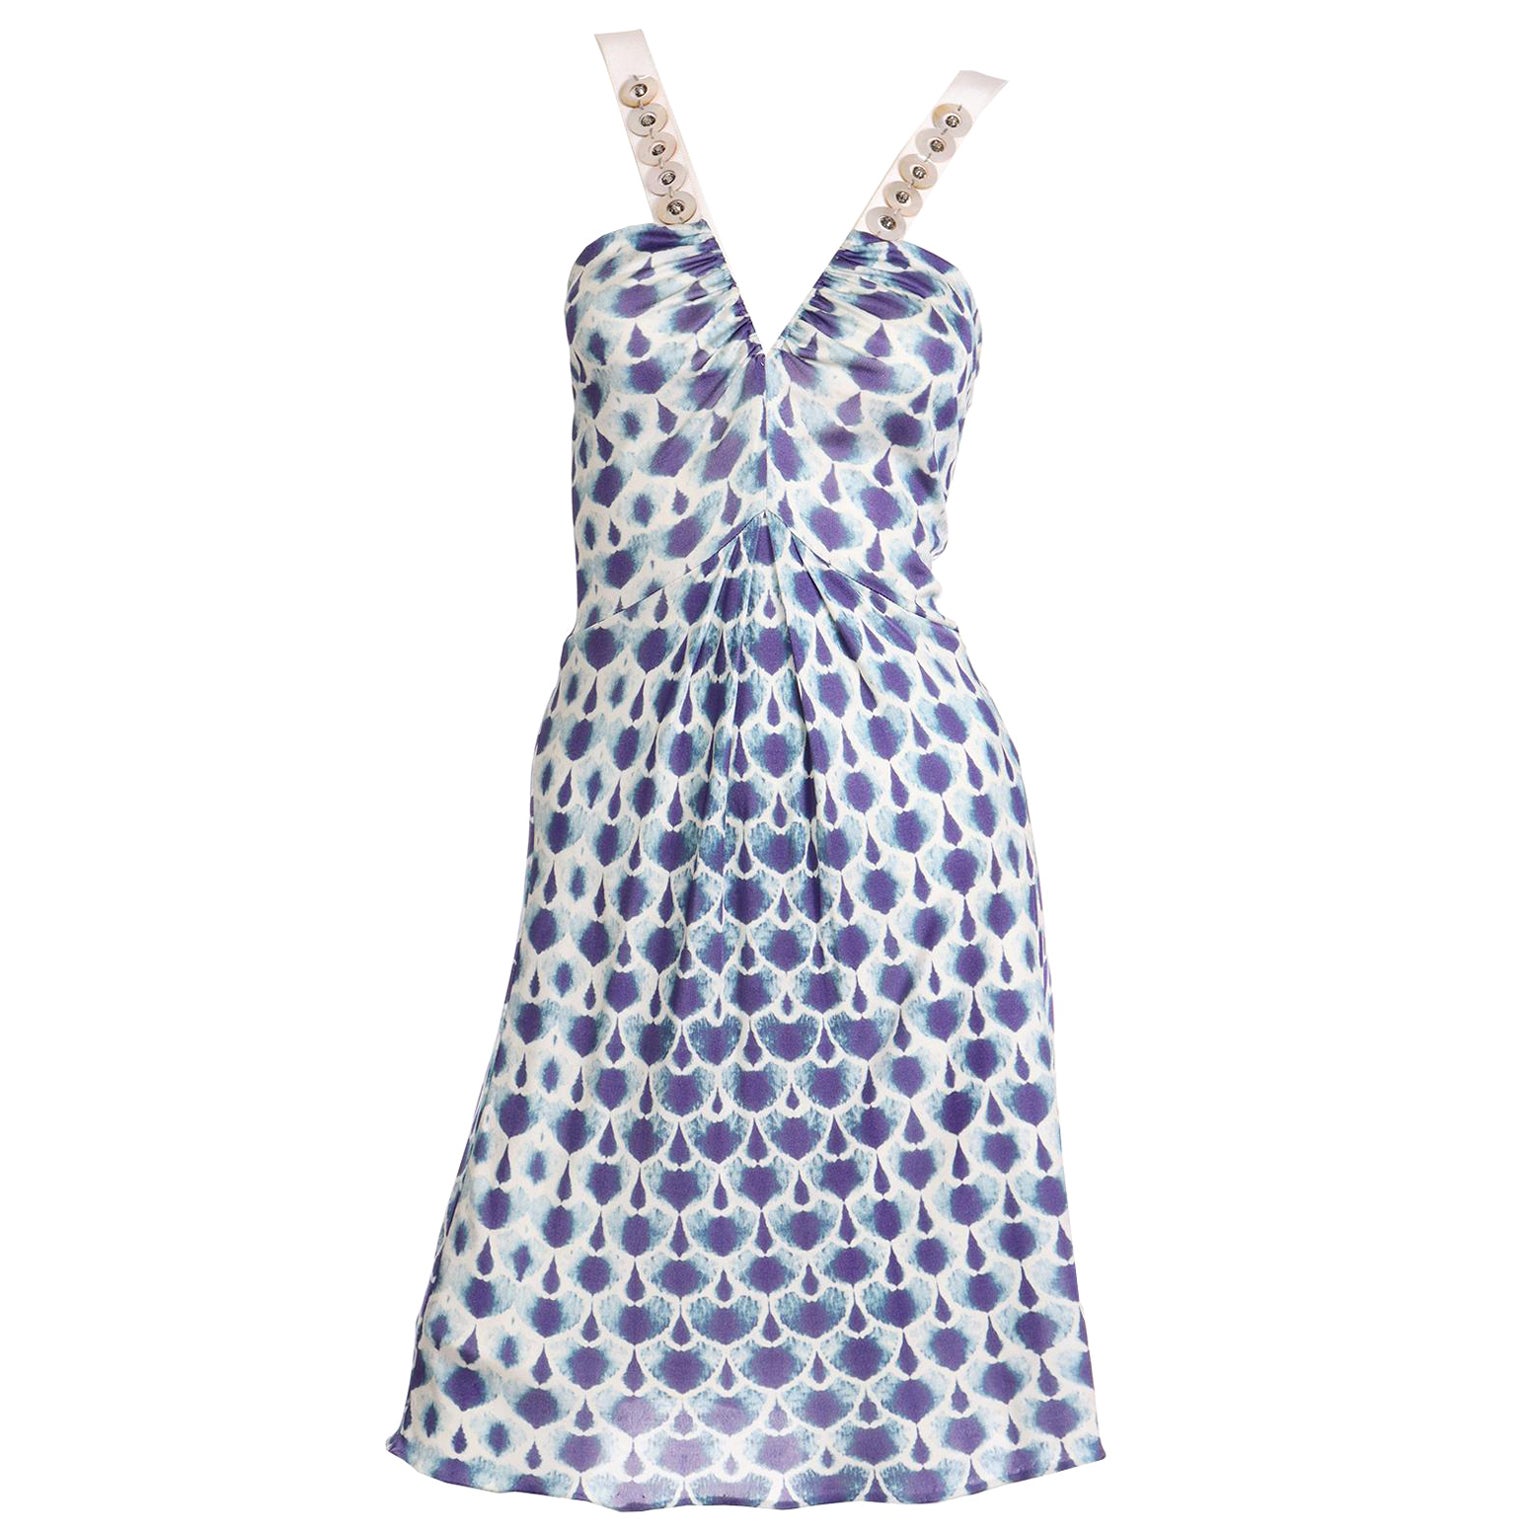 Alberta Ferretti Vintage Early 2000s Blue and White Low V Dress W Shell Details